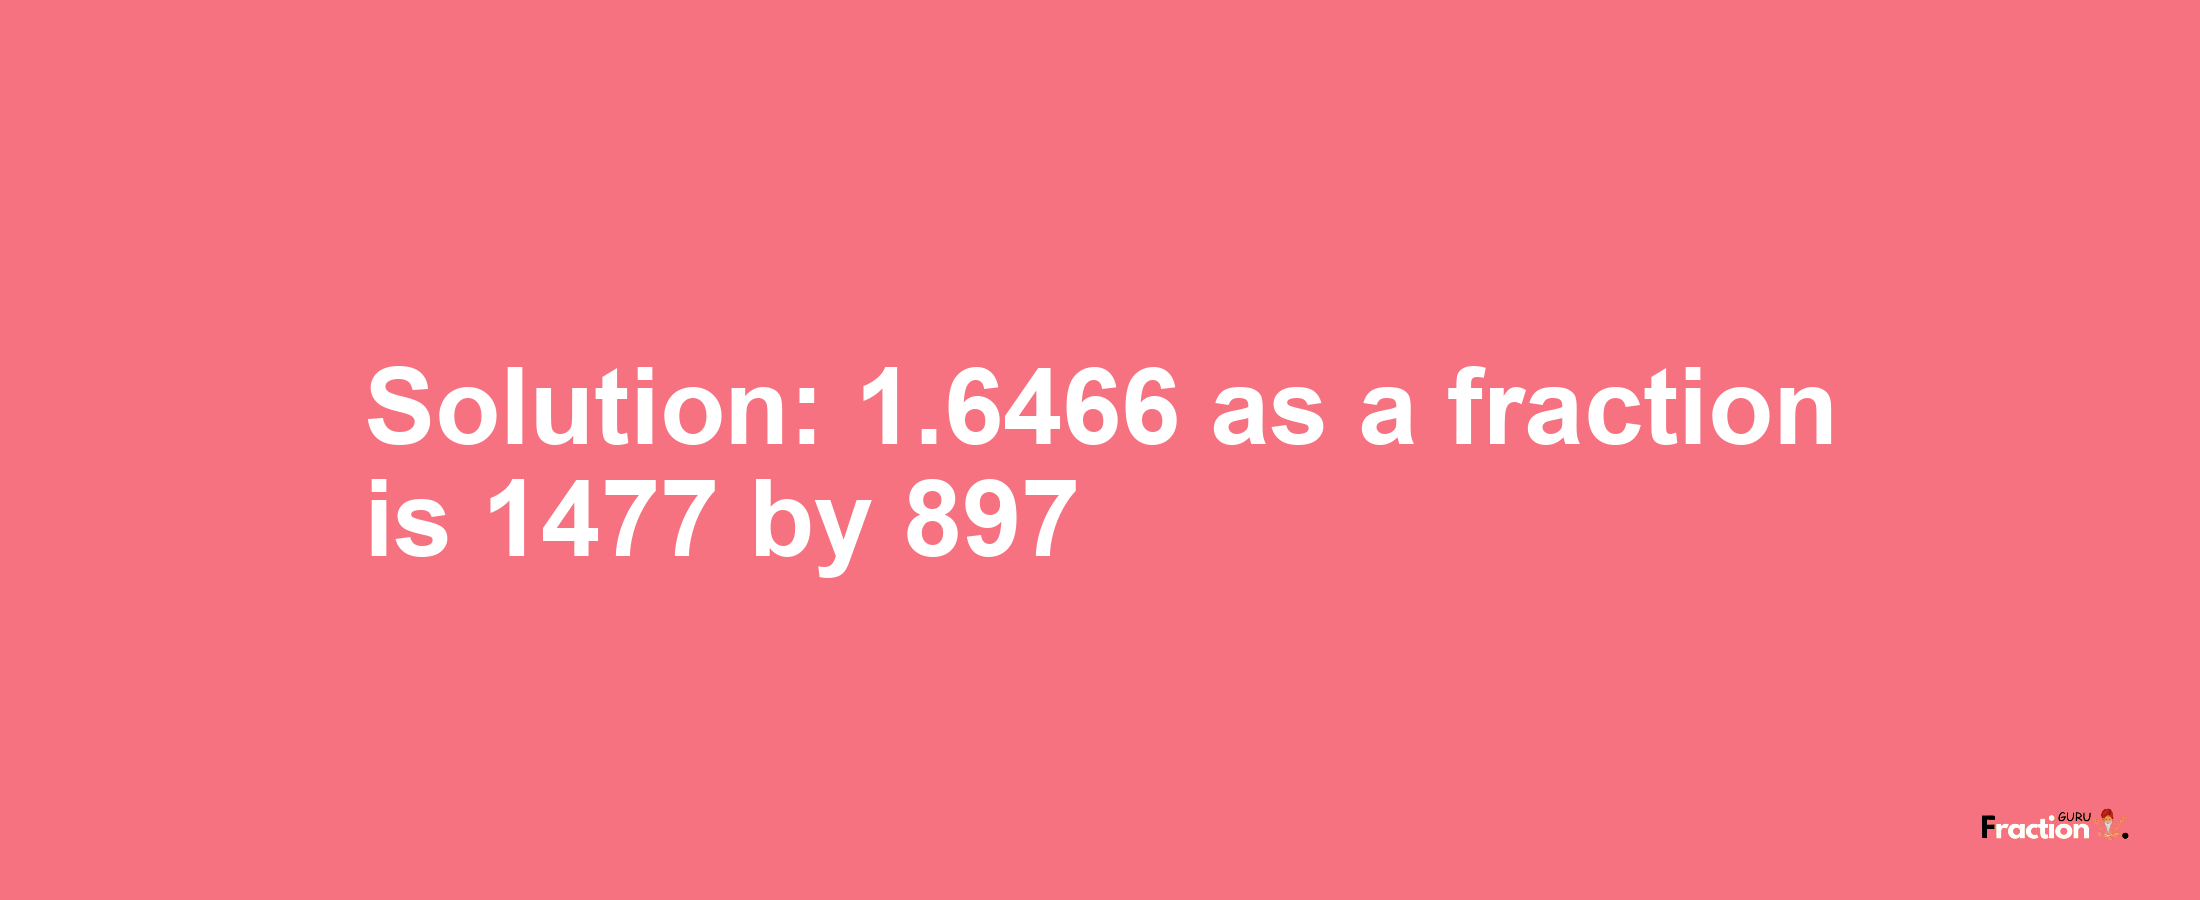 Solution:1.6466 as a fraction is 1477/897